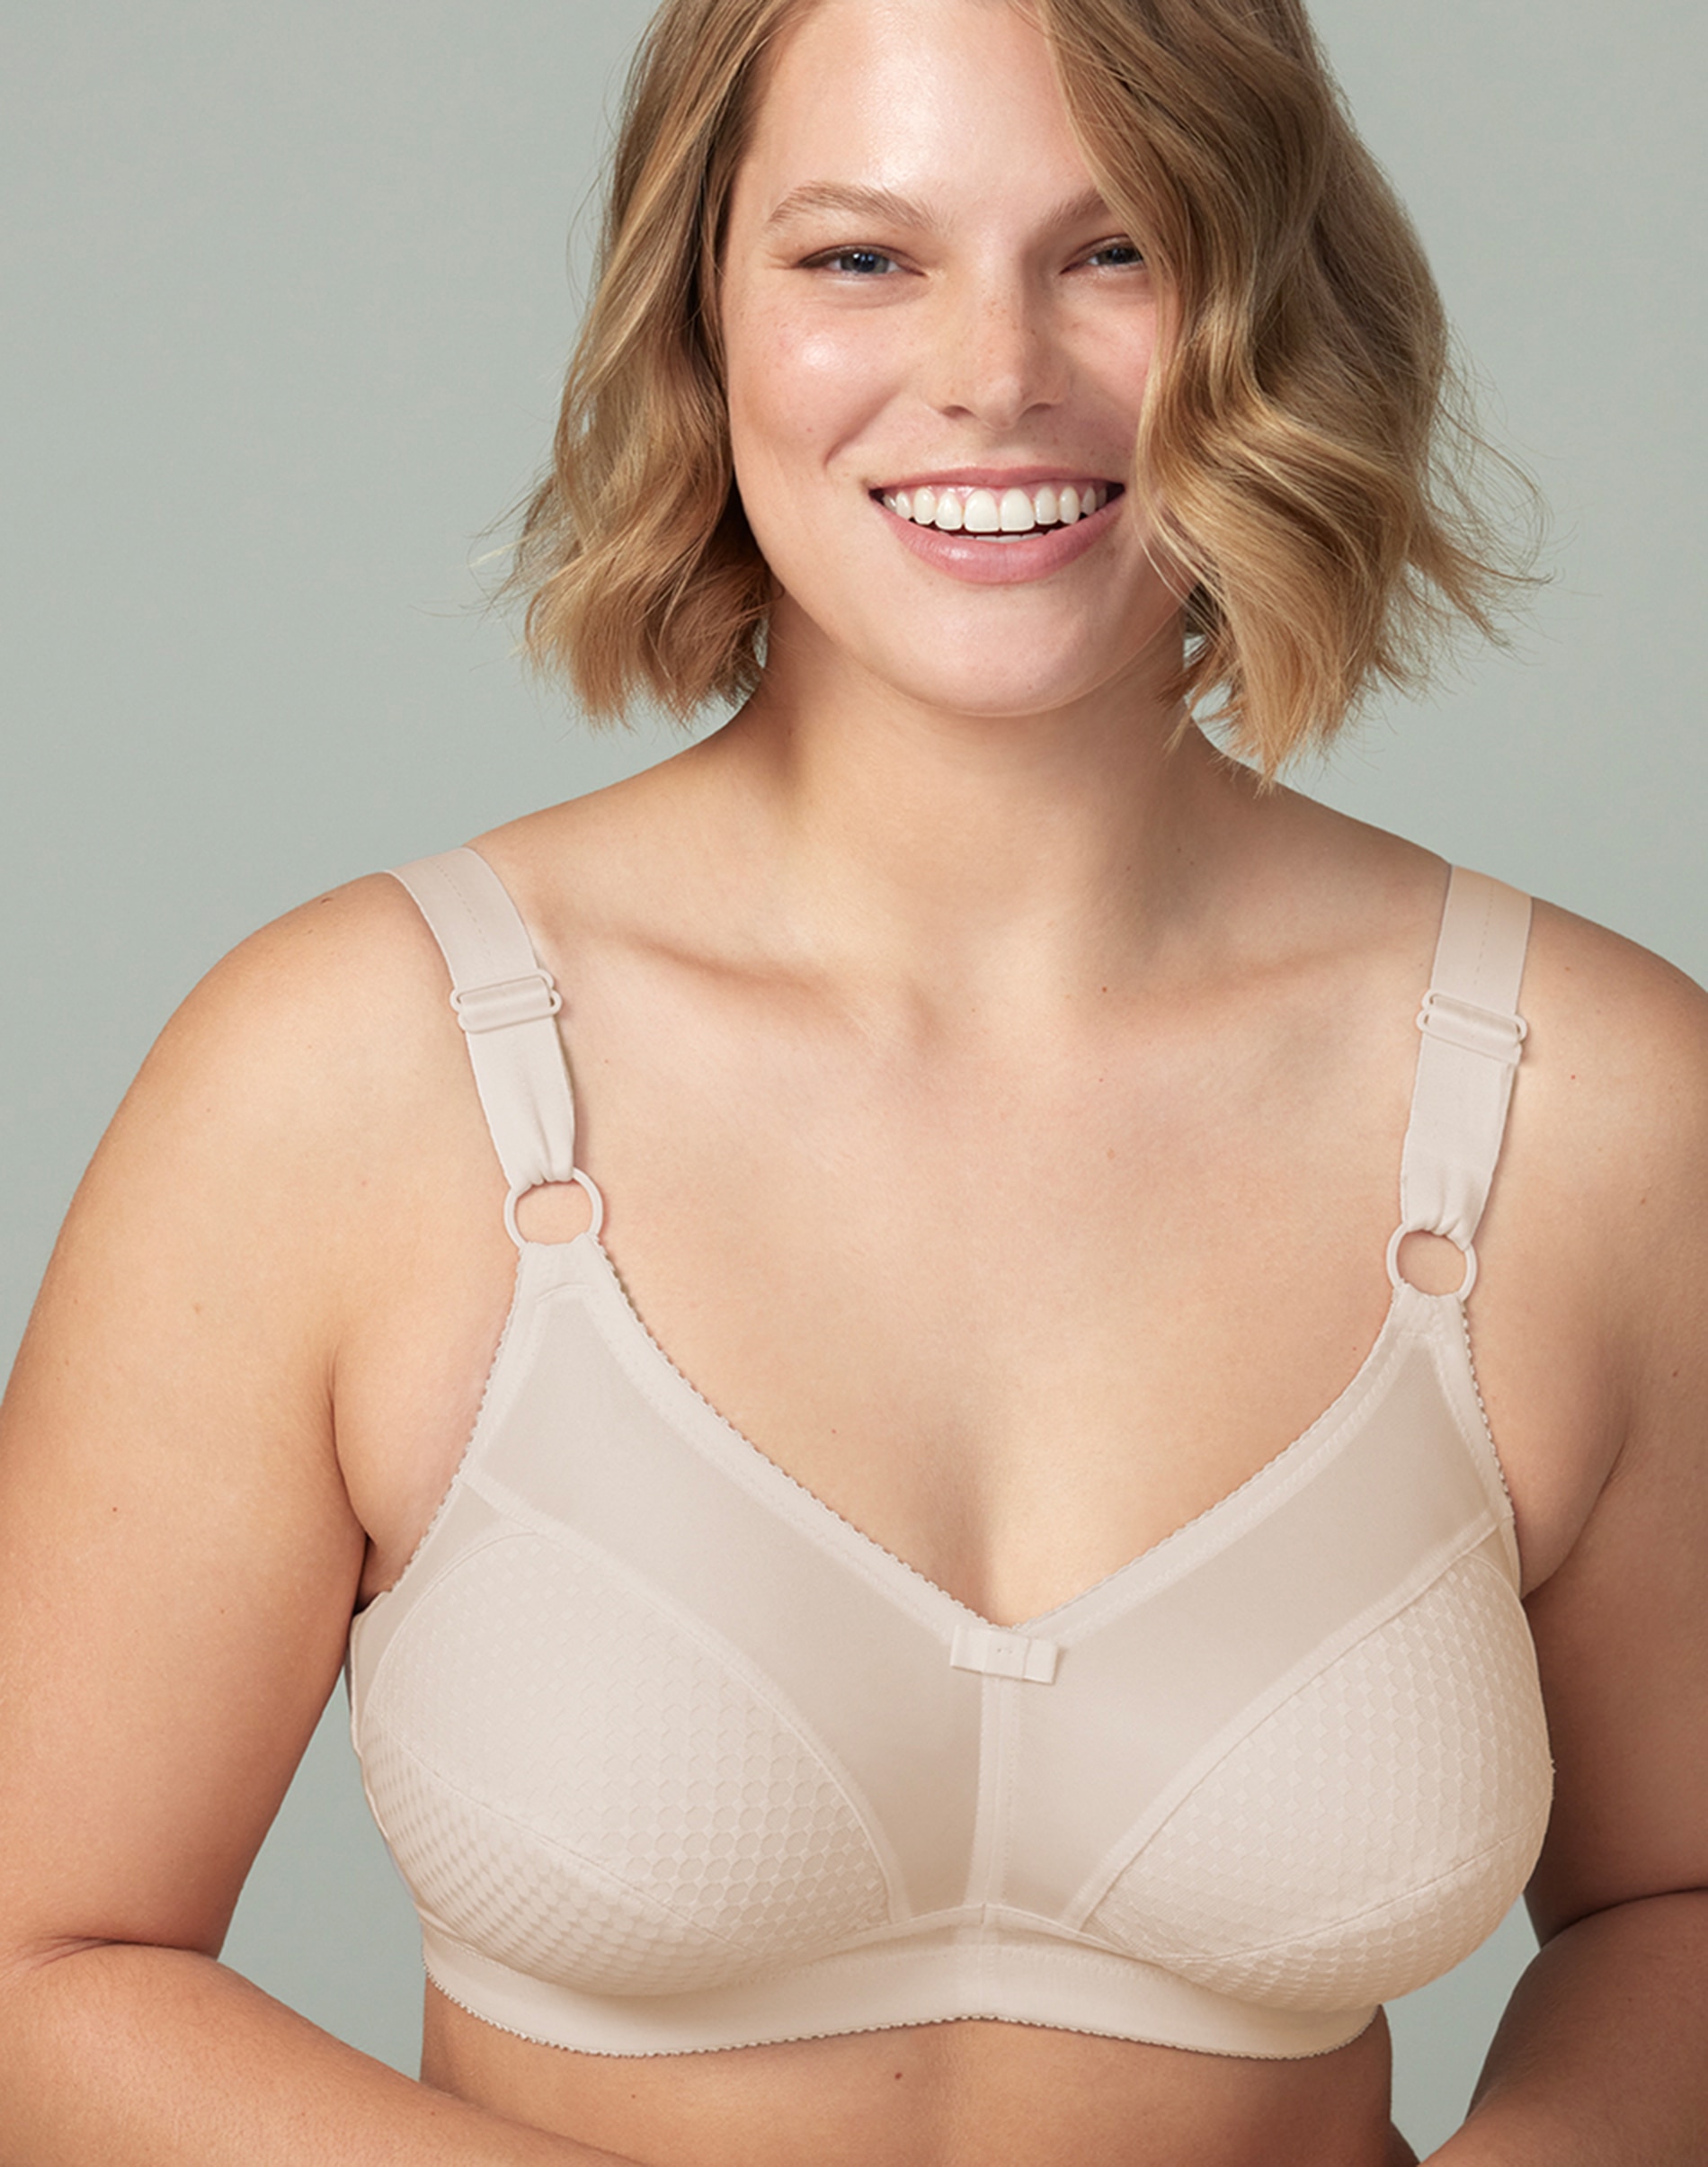 Aisemny Women's Beautiful Smooth Back Bra Without Underwire Bra